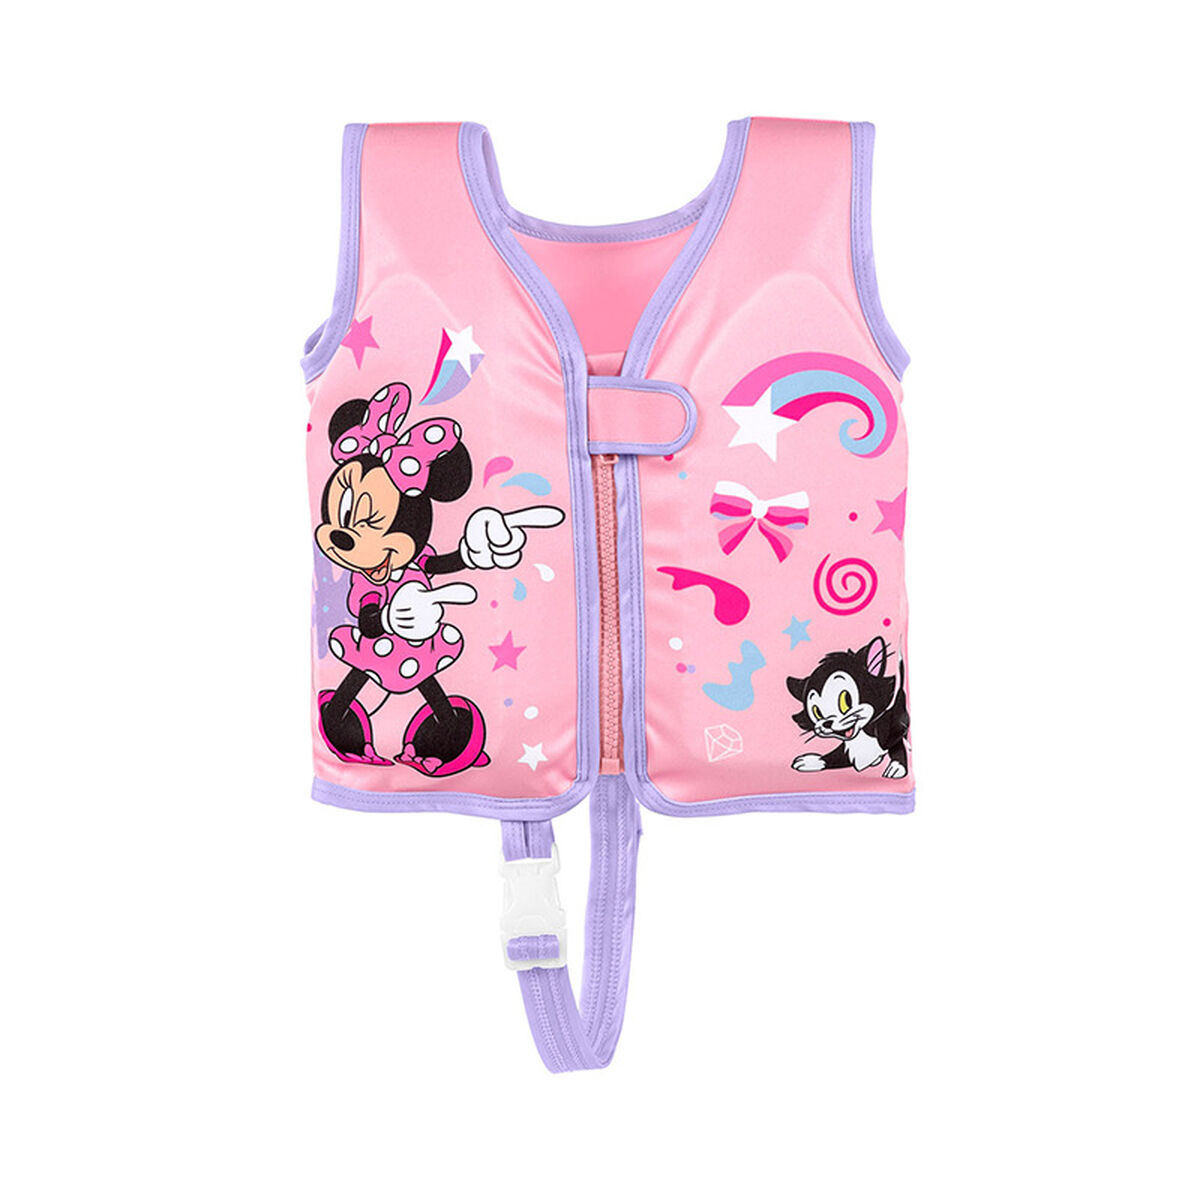 Chaleco Hinchable Para Piscina Bestway Minnie Mouse